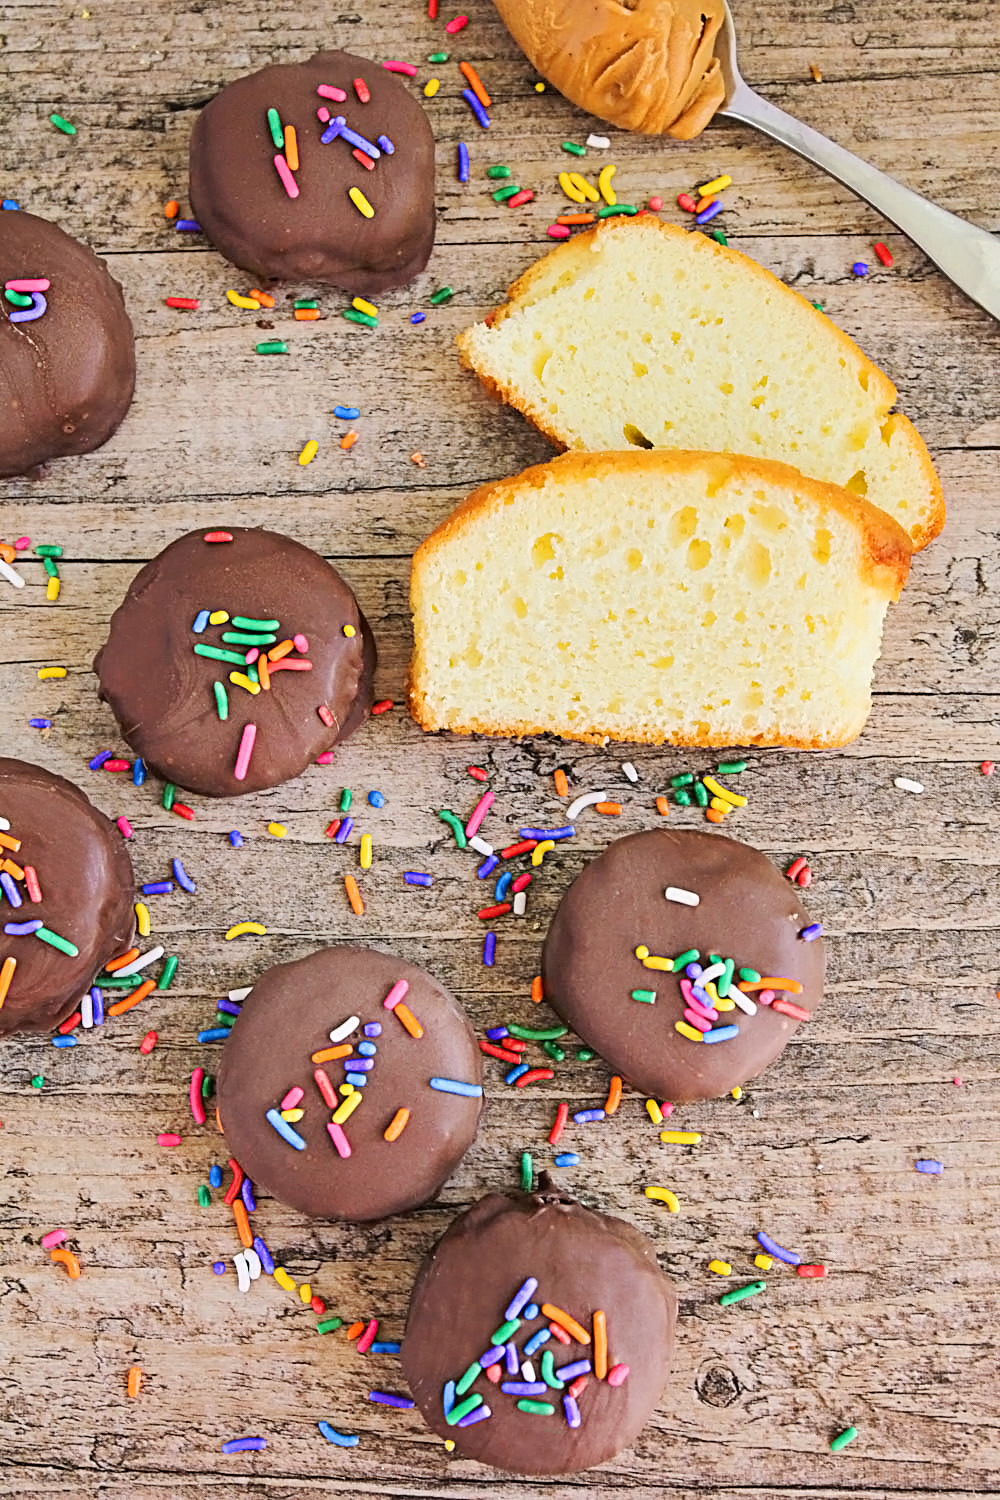 These Tagalong pound cake bites are so addicting and delicious! Sweet pound cake topped with peanut butter and dipped in chocolate - yum!